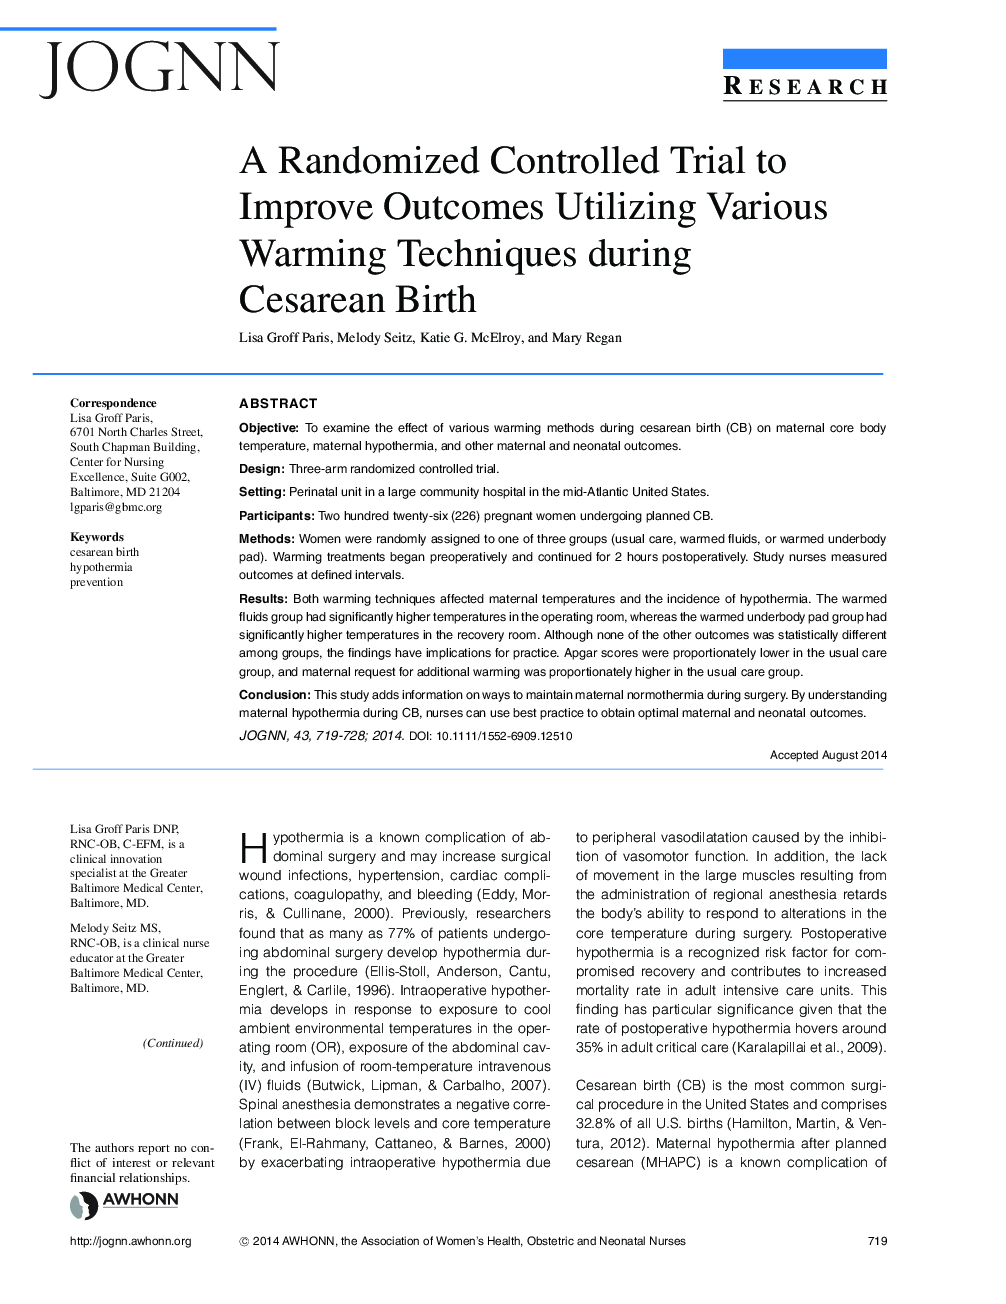 A Randomized Controlled Trial to Improve Outcomes Utilizing Various Warming Techniques during Cesarean Birth